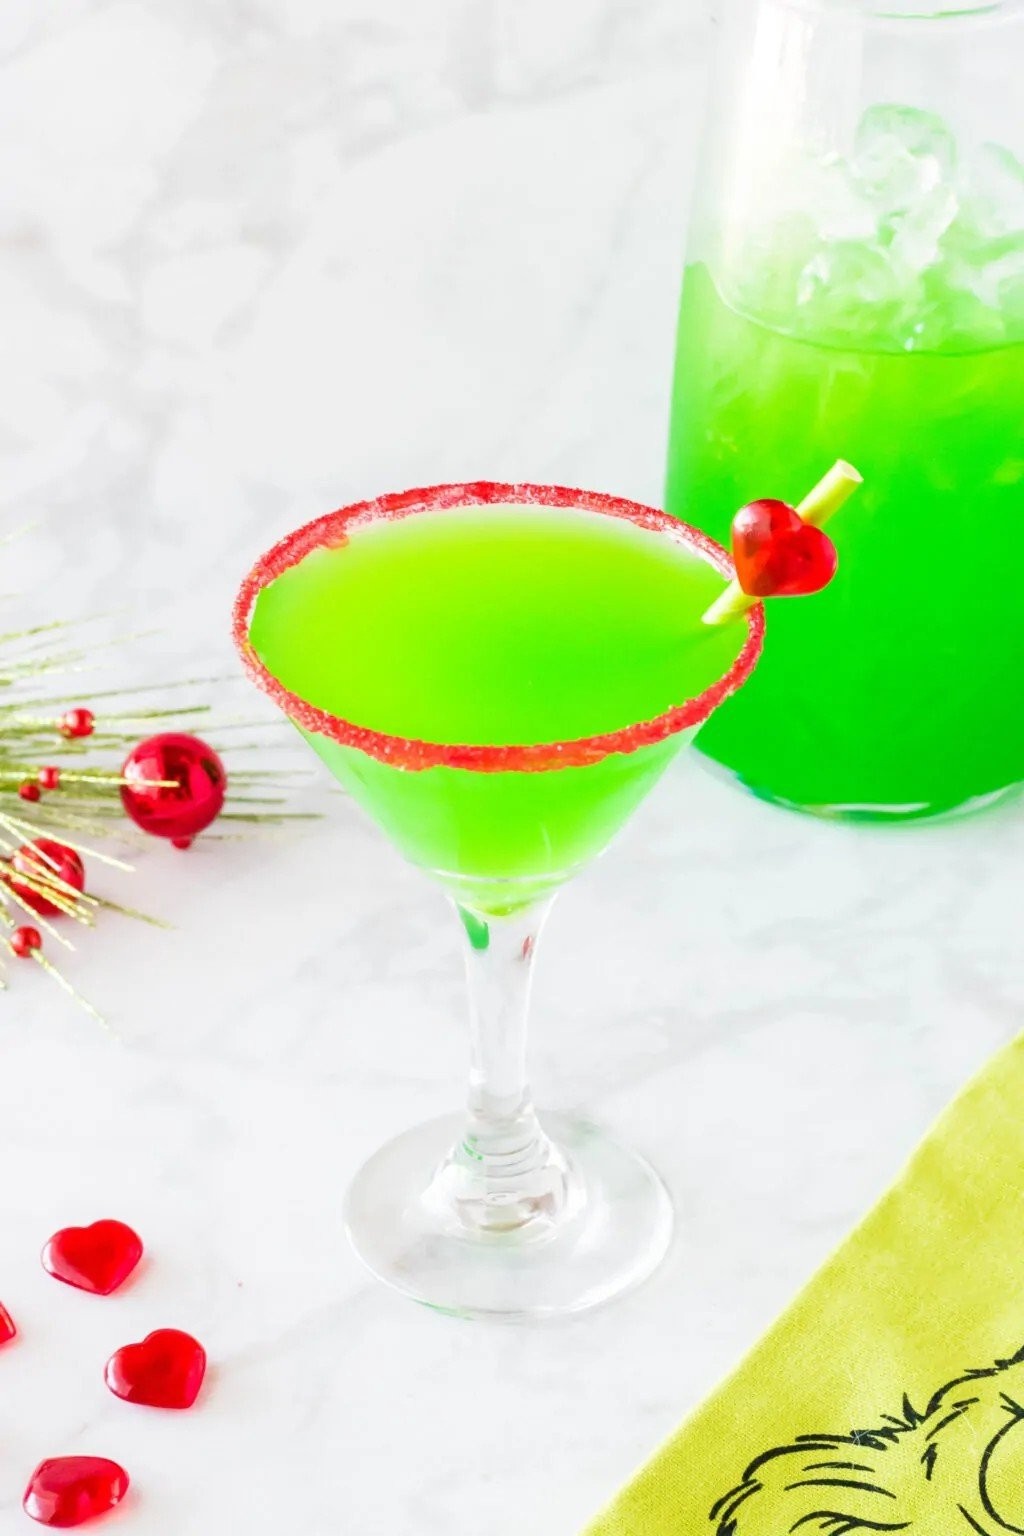 orig-the-grinch-cocktail-recipe-with-video-20191113151656092427934ws.jpg